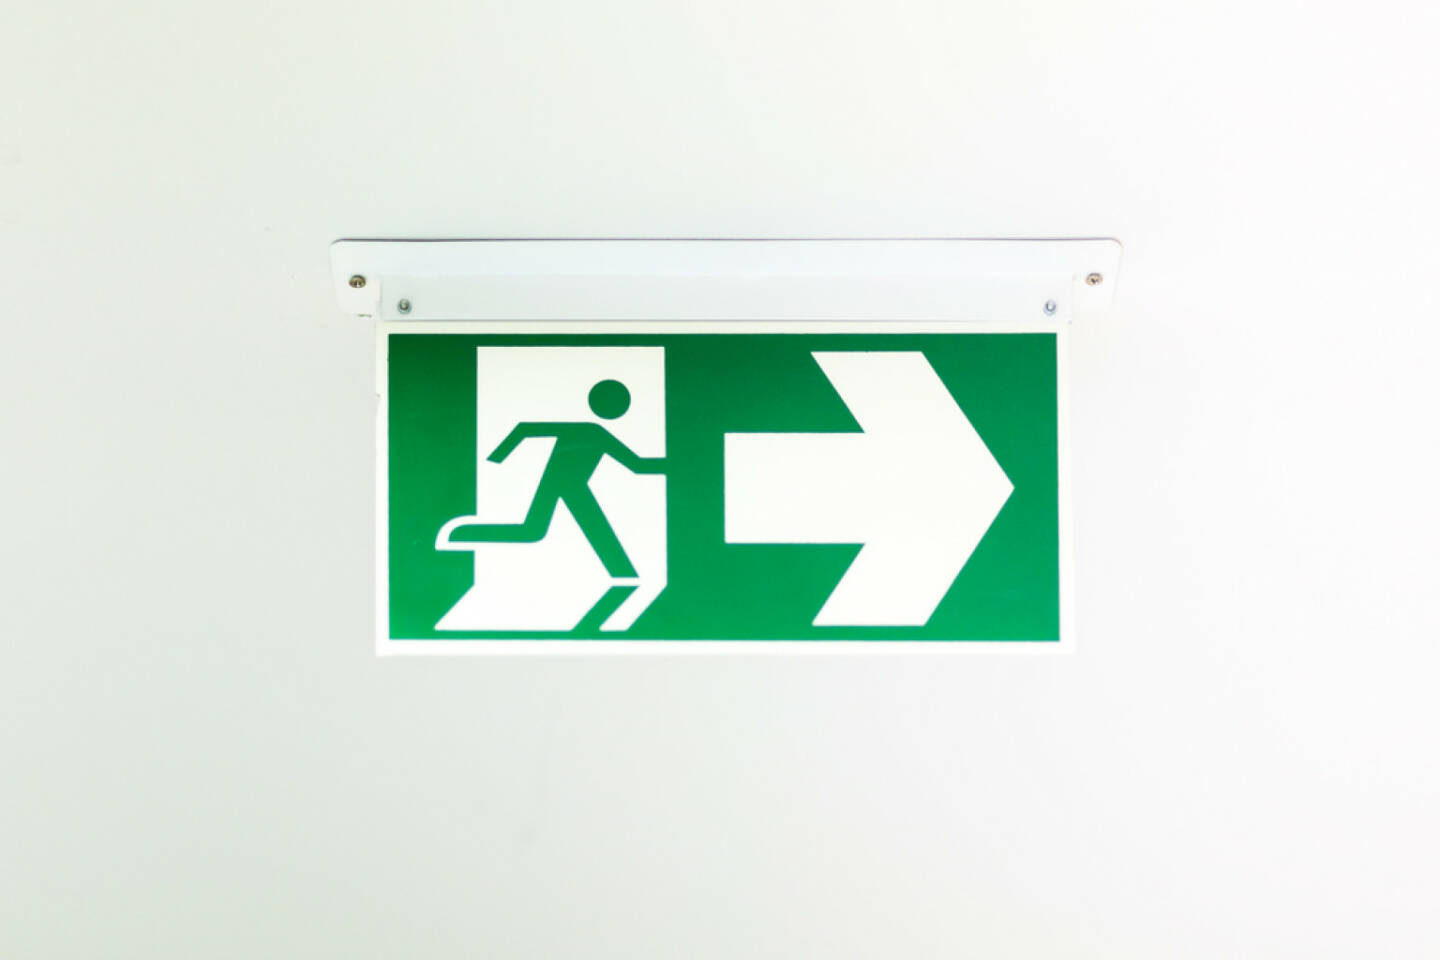 Notausgang, Ausgang, Exit, laufen, Not, Hilfe, emergency, http://www.shutterstock.com/de/pic-181299071/stock-photo-green-emergency-exit-sign-showing-the-way-to-escape.html